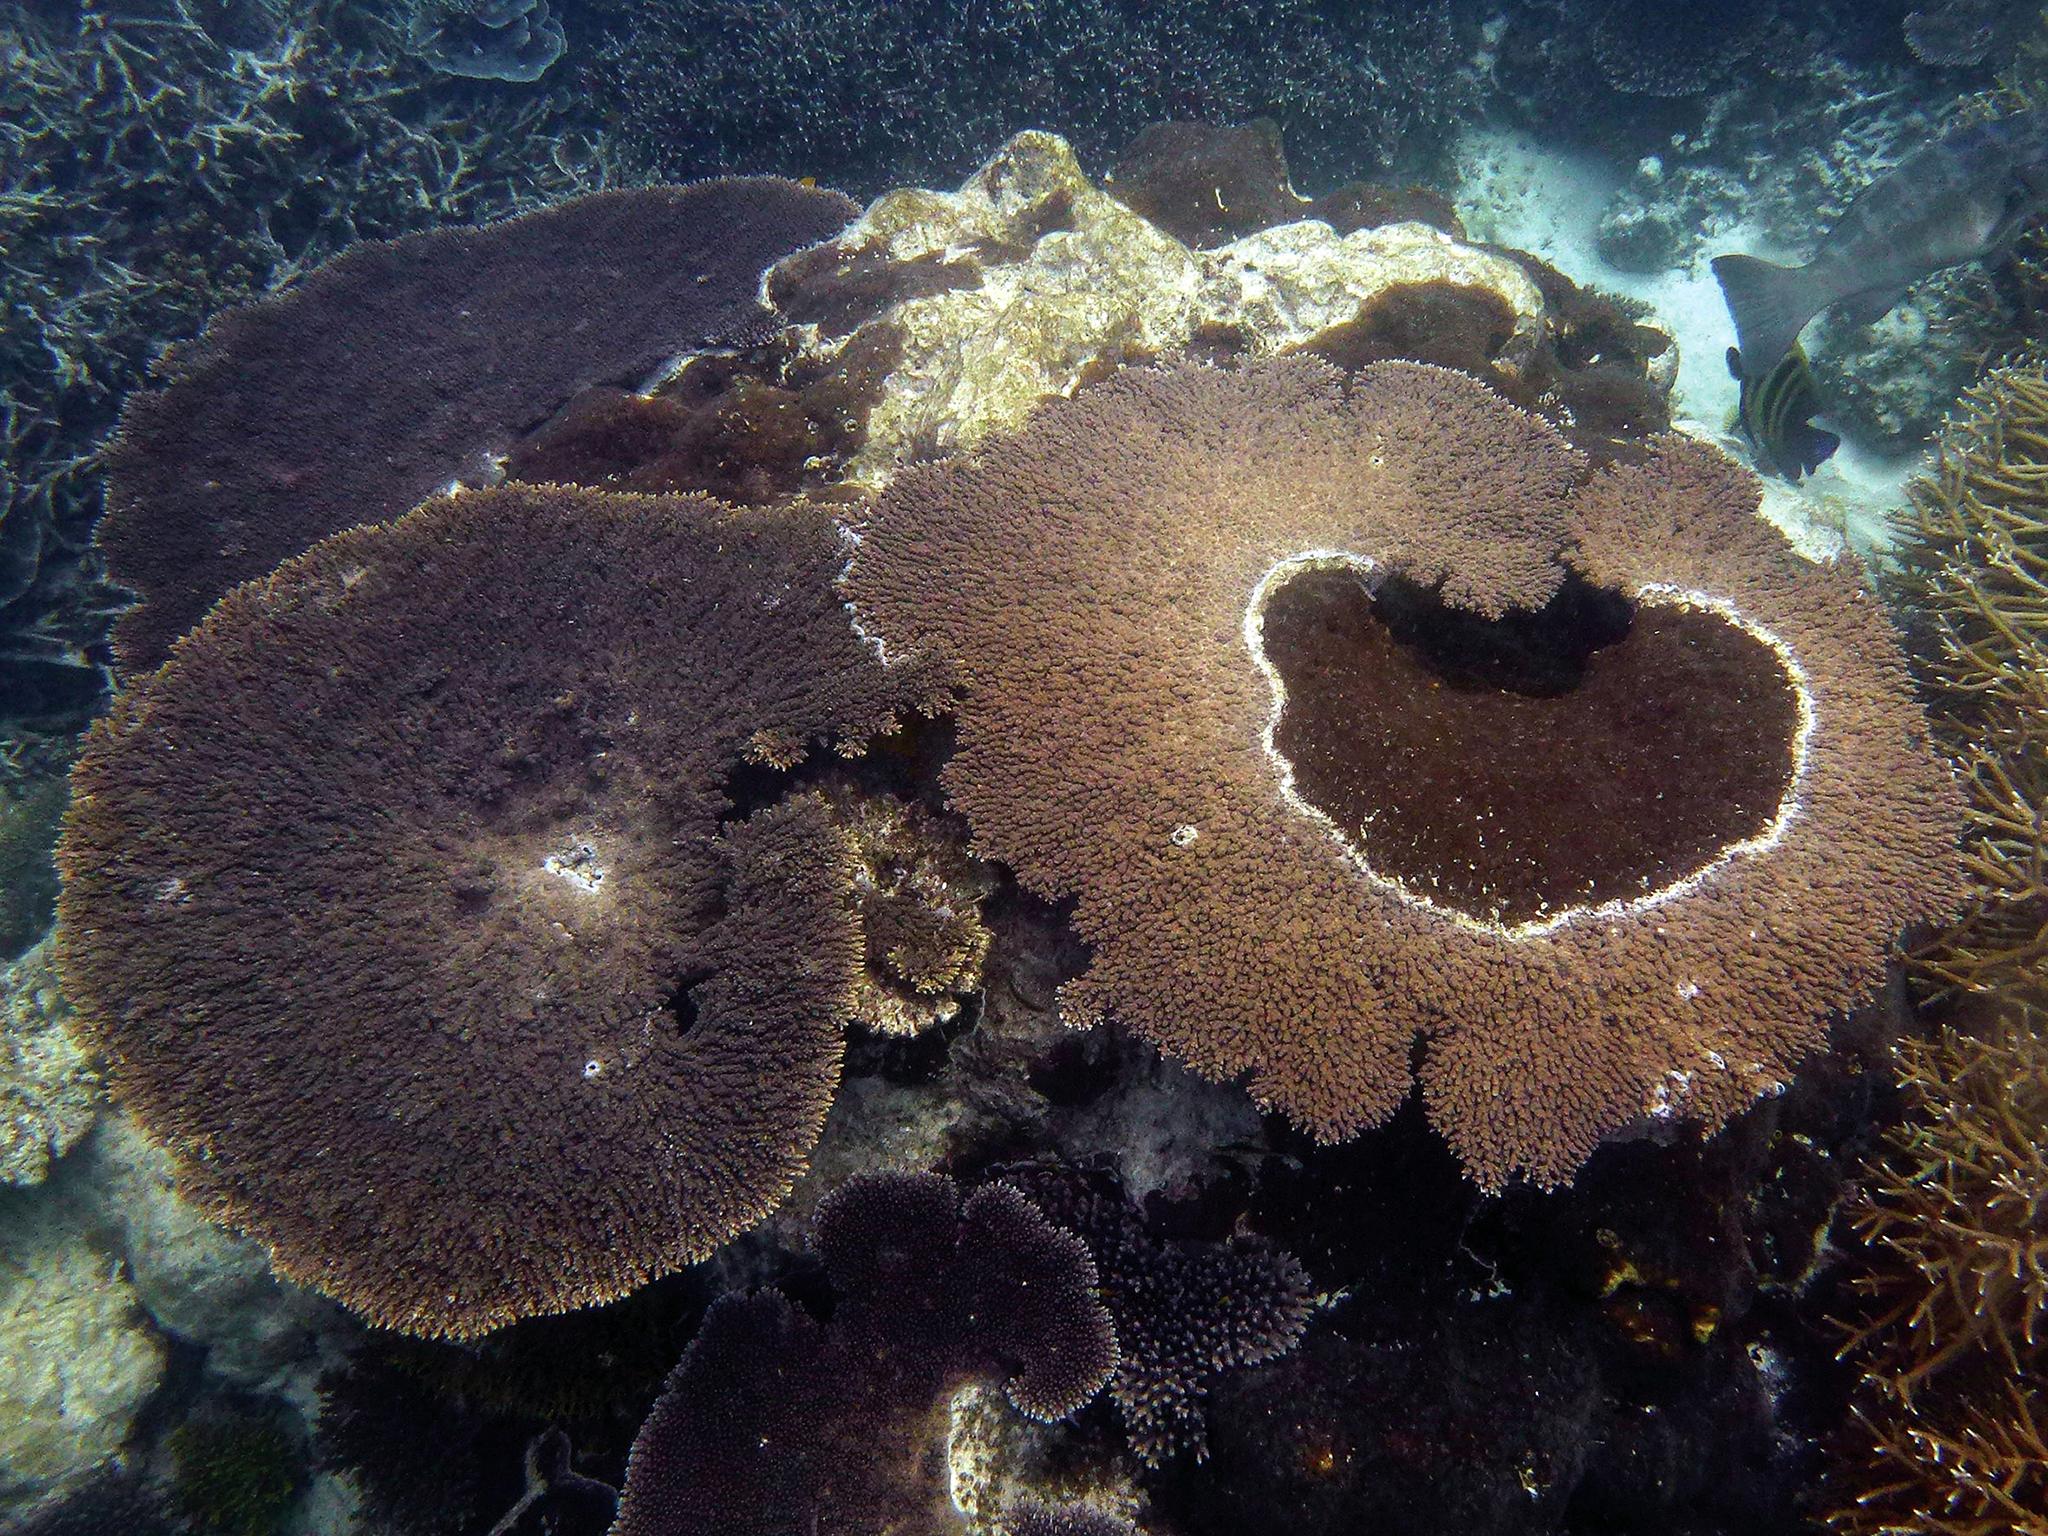 Sponges, such as this coral-excavating species, survive on the organic matter dissolved in their surrounding seawater